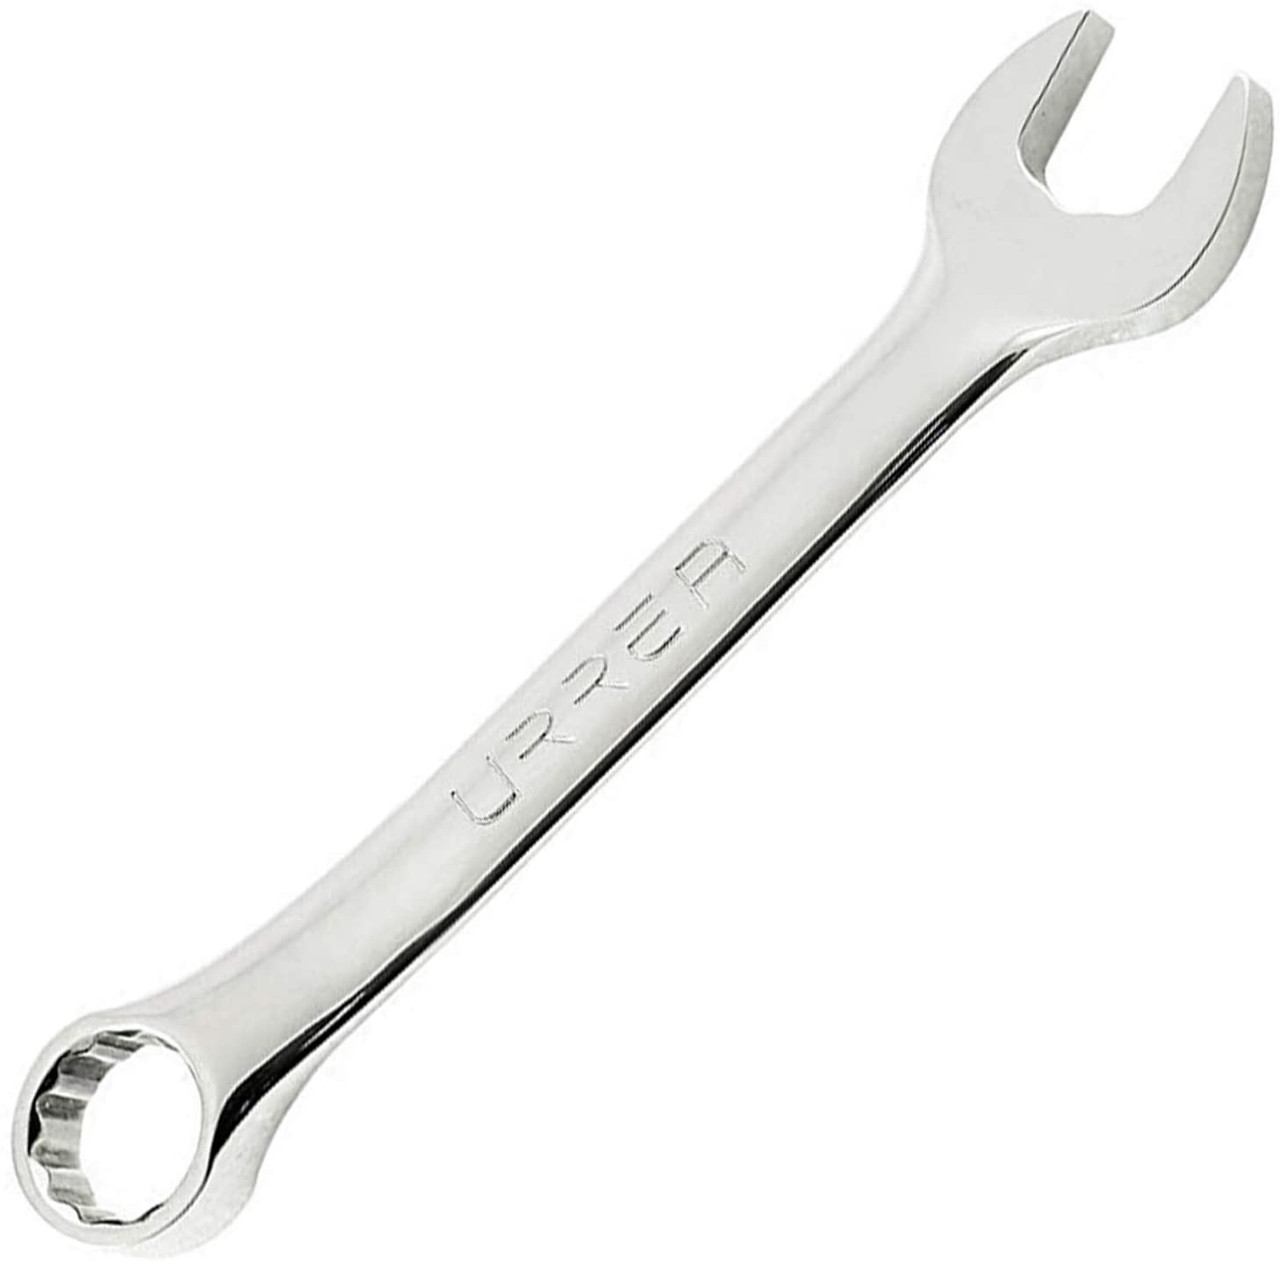 Full polished short combination wrench, Size: 18 mm, 12 point, Total Length: 6-1/2"